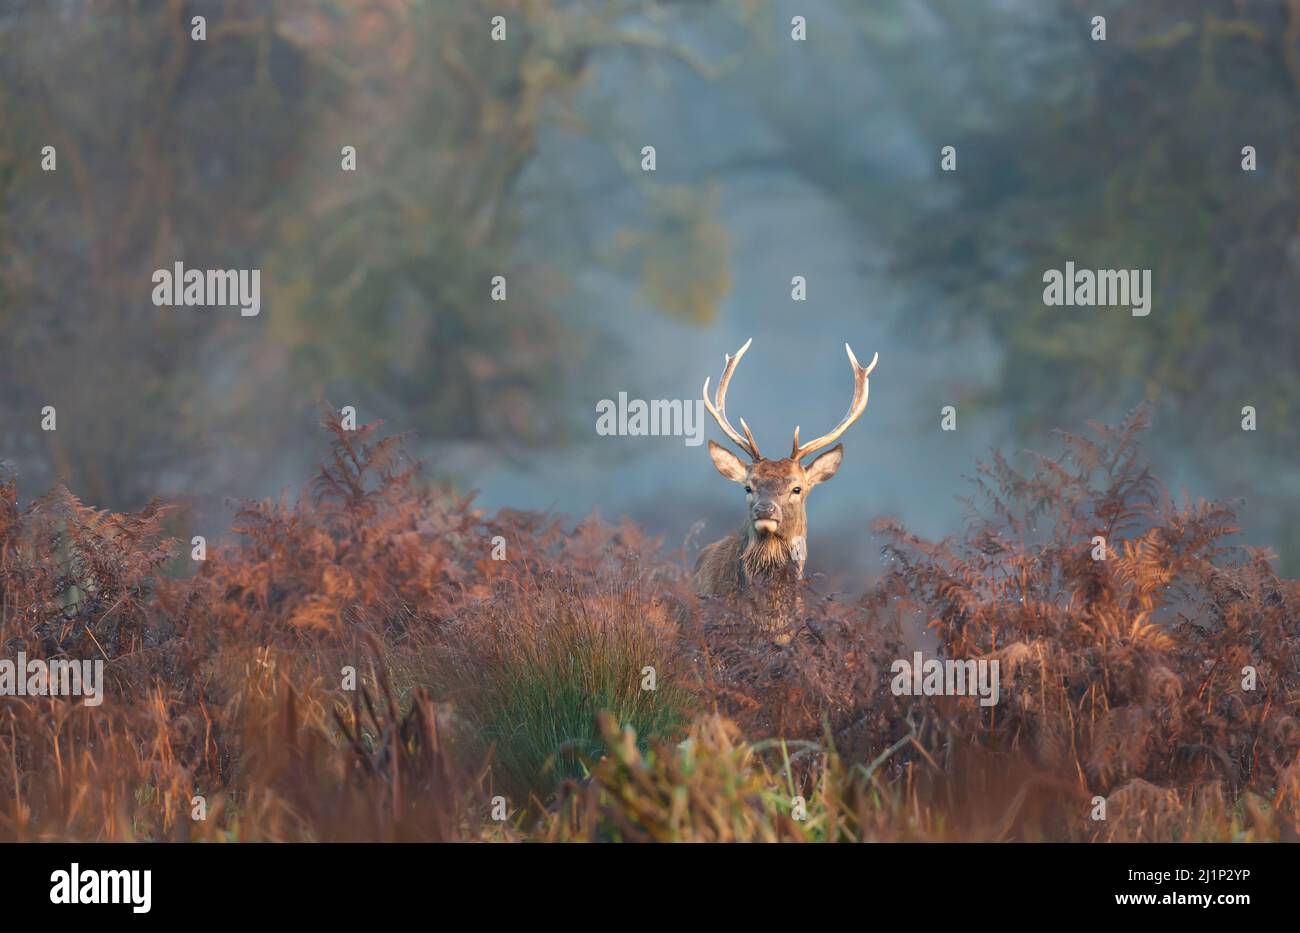 Close up of a young red deer stag standing in bracken in autumn, UK. Stock Photo